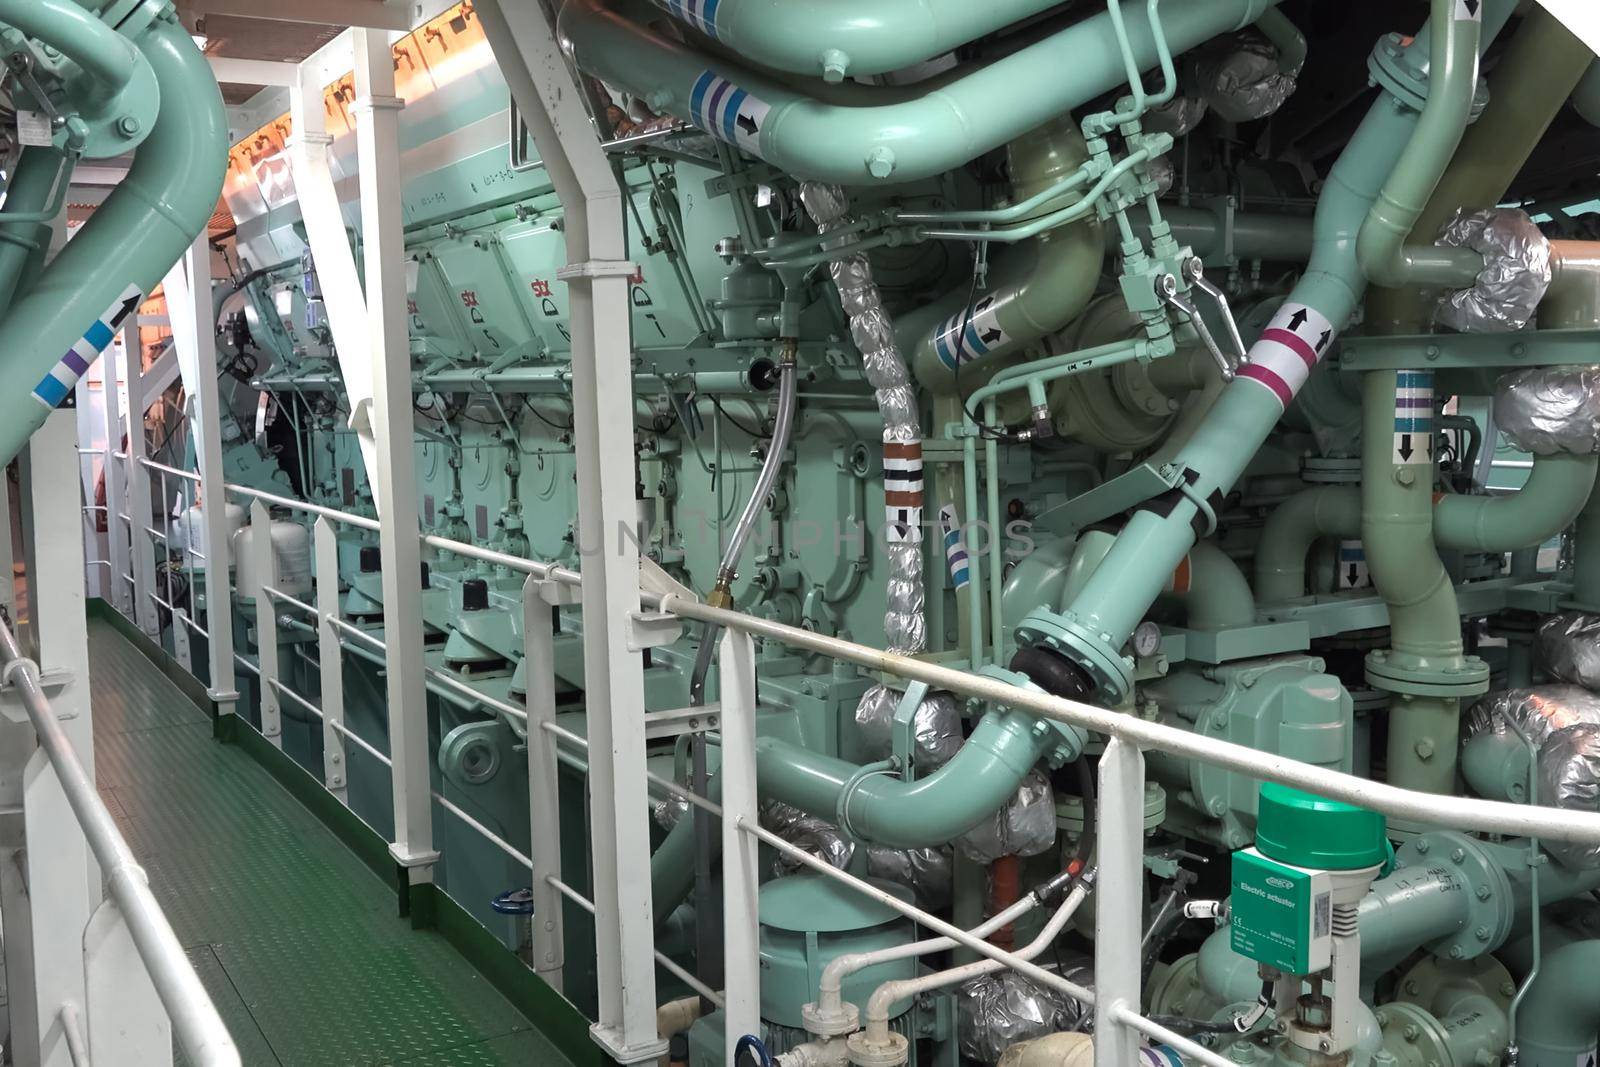 The engine compartment of the ship. Engine and steering equipment. by DePo